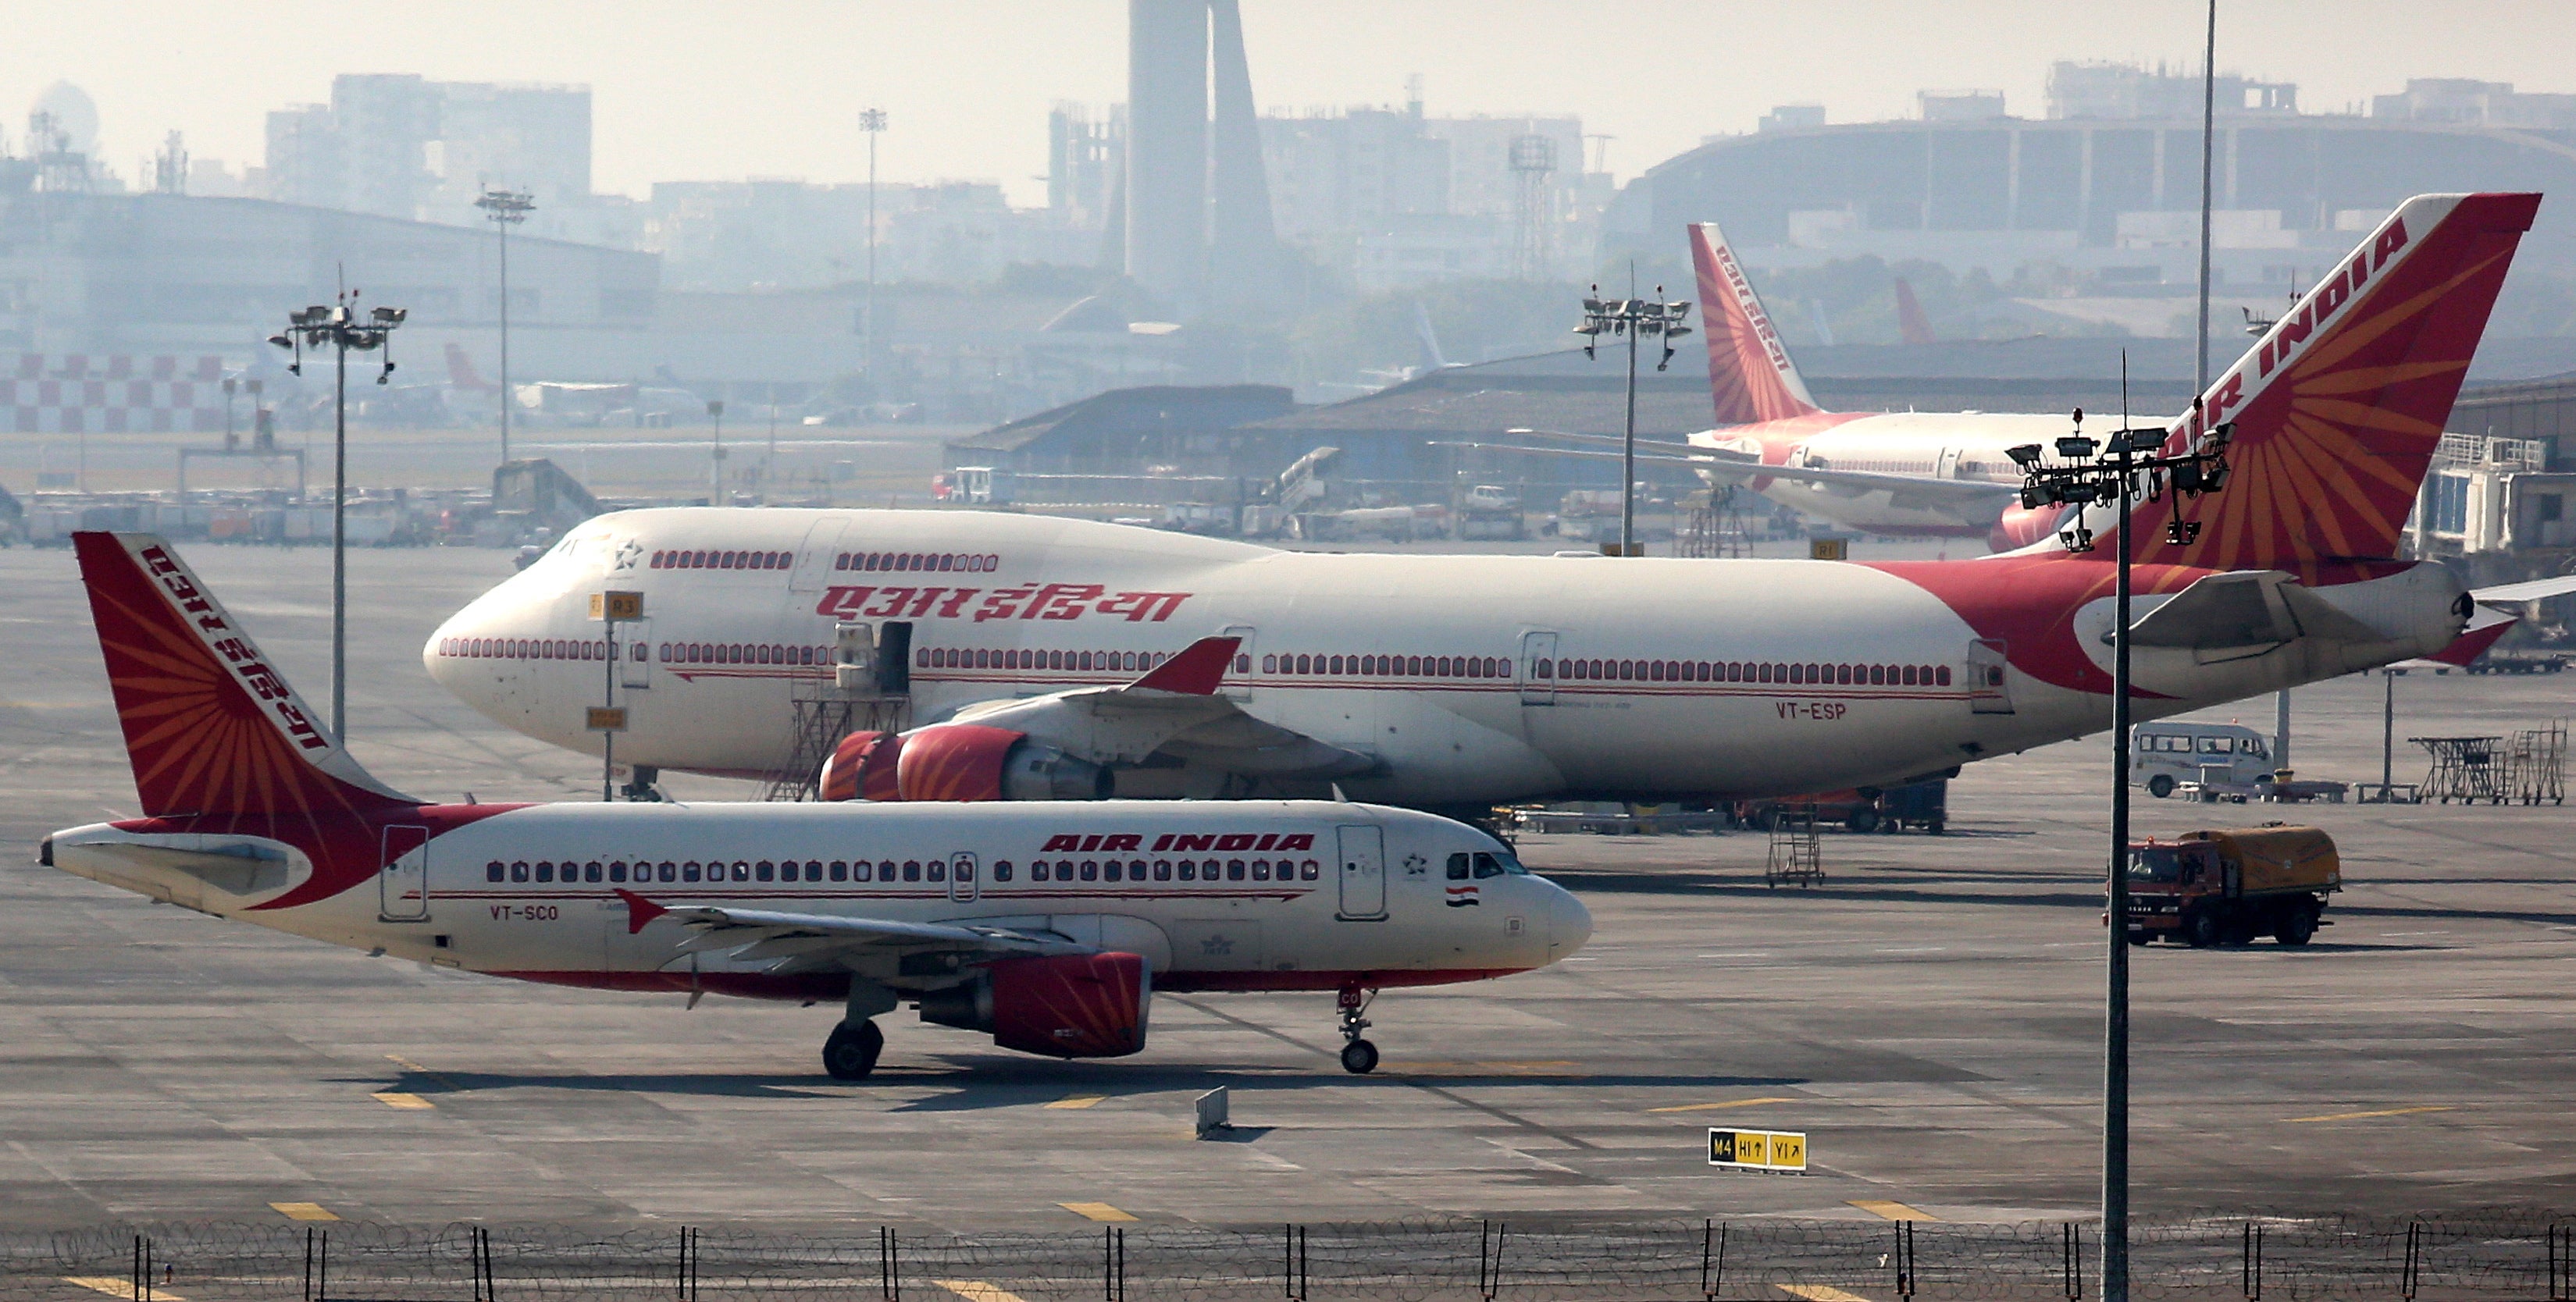 India extends ban on flights from the UK after 20 cases of new strain